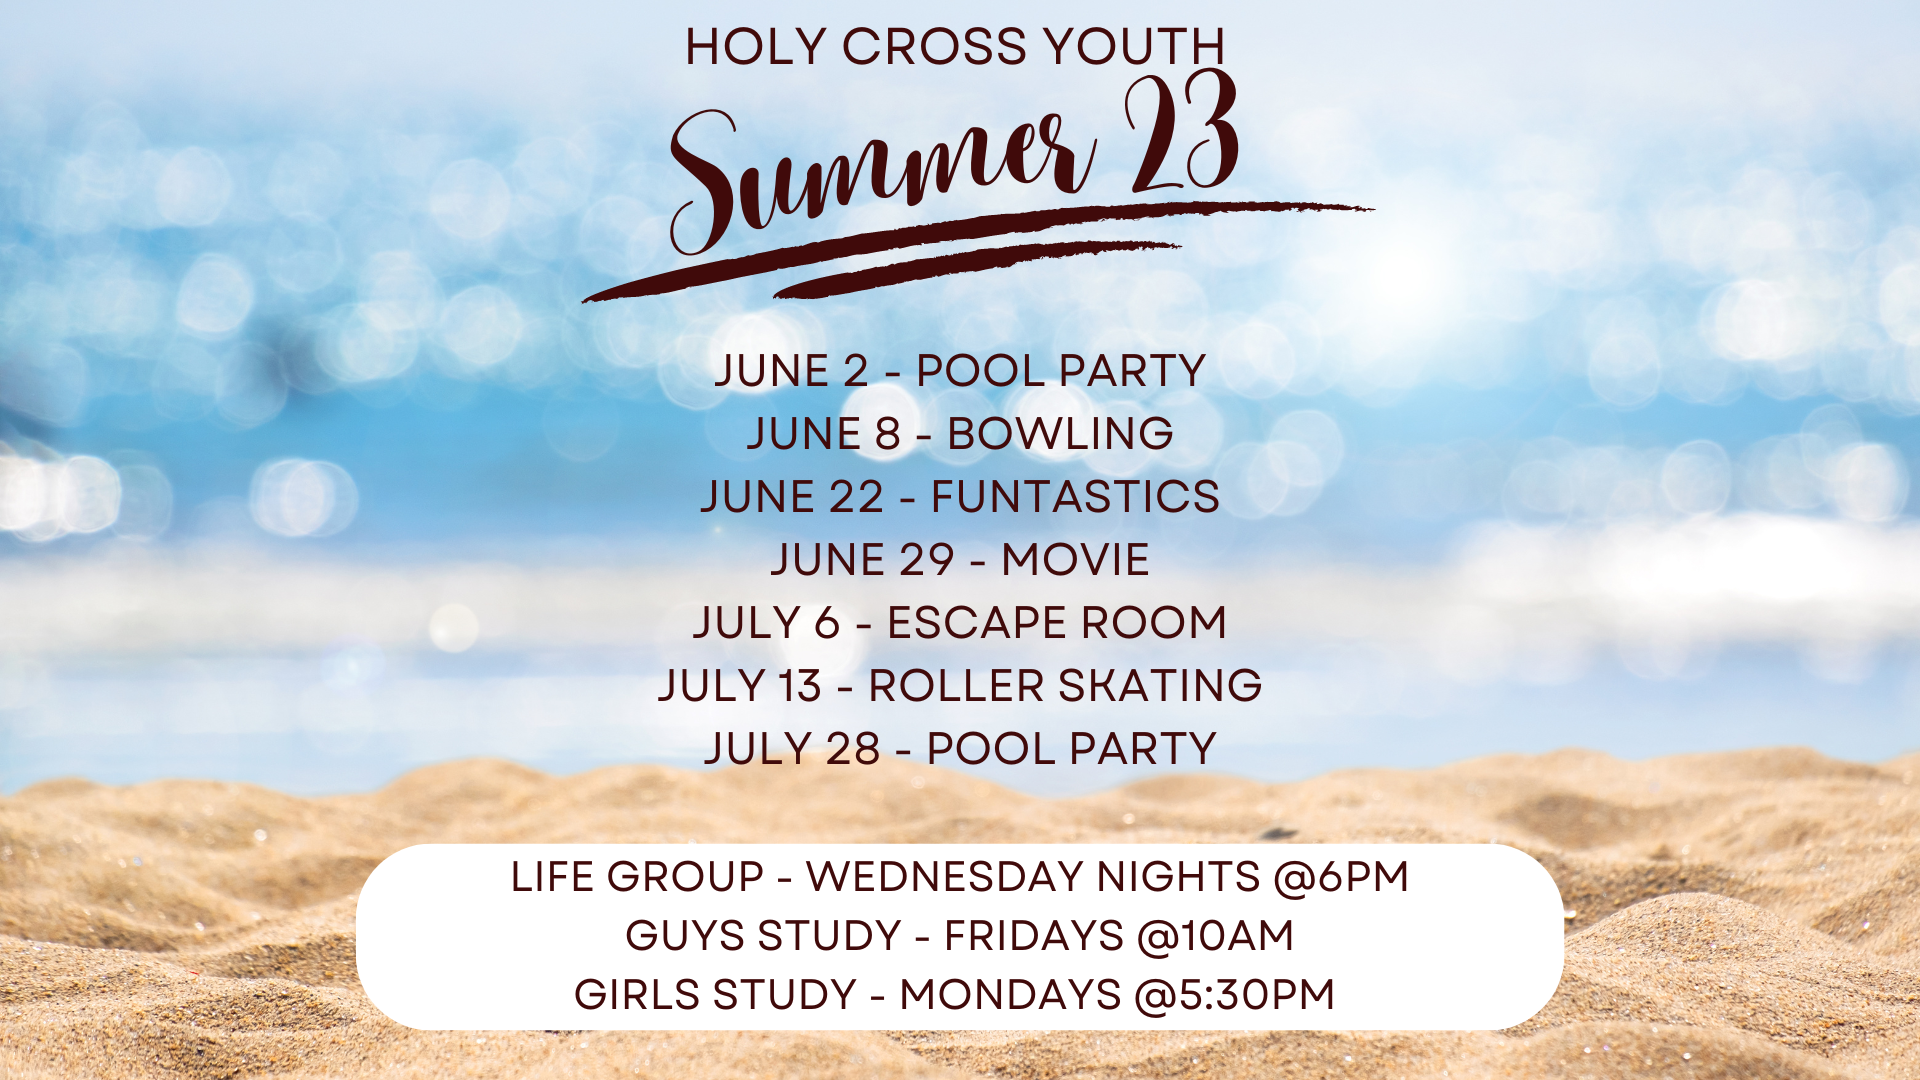 Youth Summer 23 image